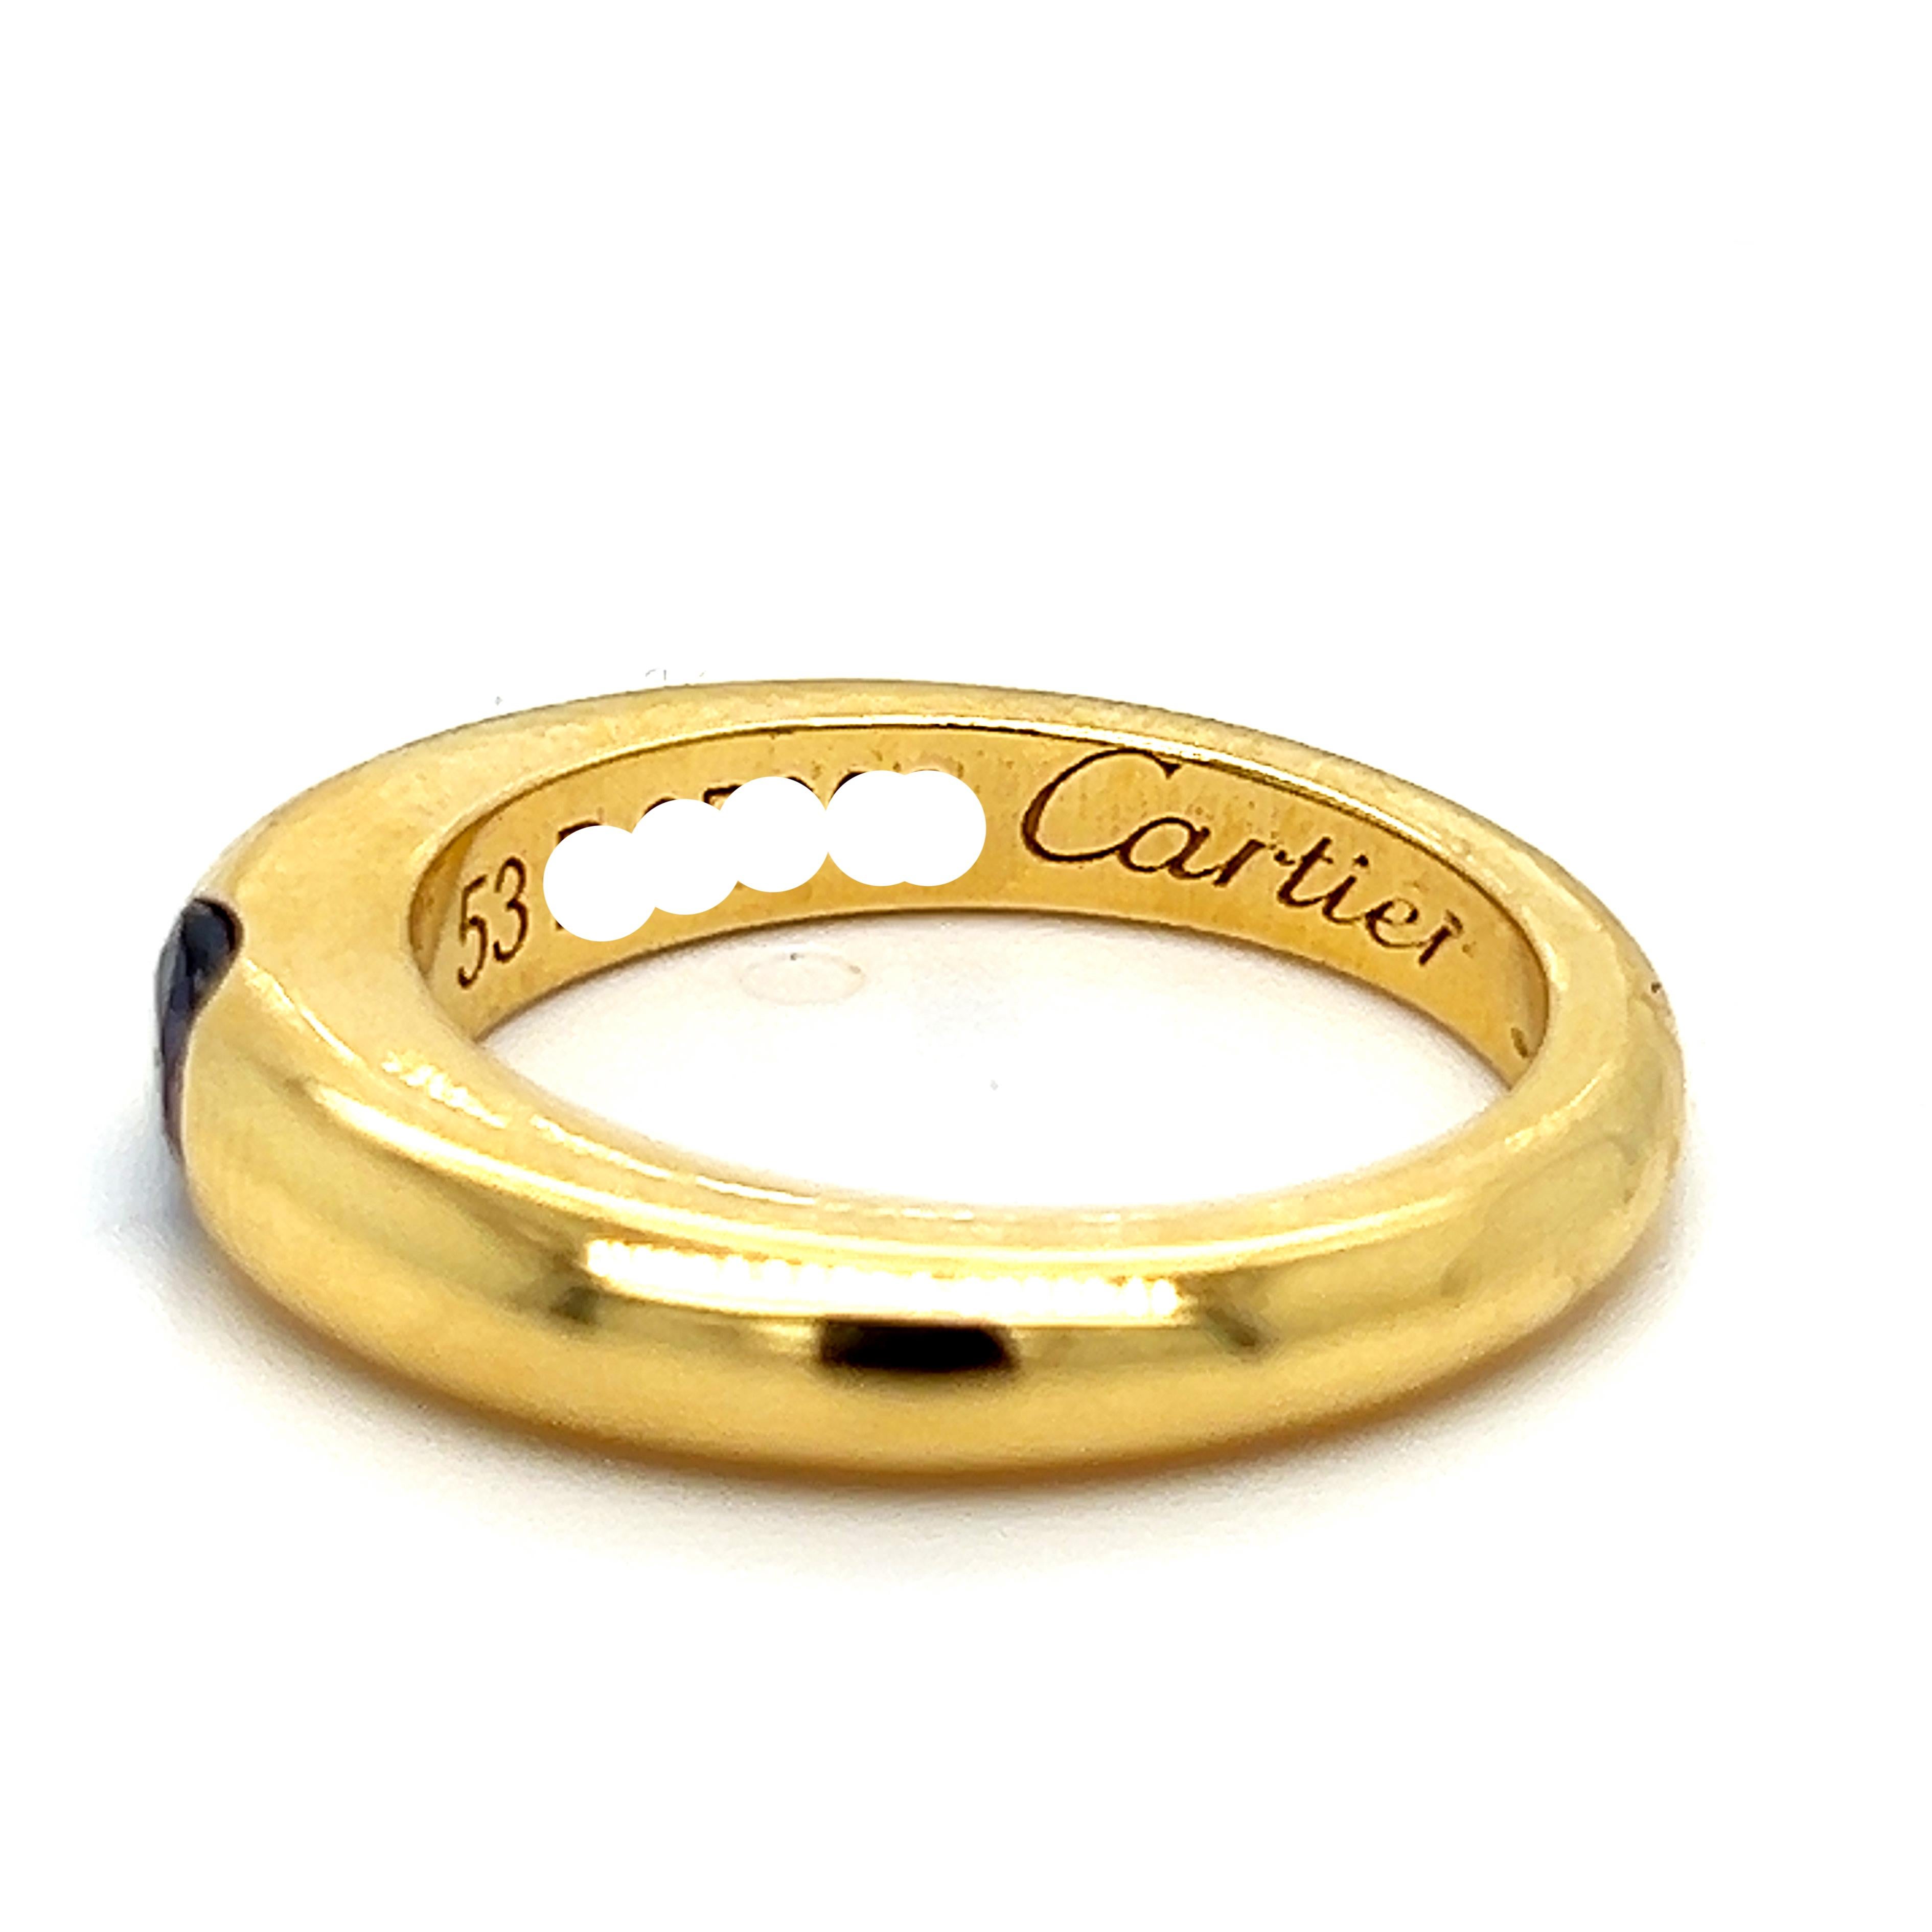 Cartier Original 1992 Oval Royal Blue Sapphire 18 Karat Yellow Gold Ellipse Ring In Excellent Condition For Sale In Valenza, IT